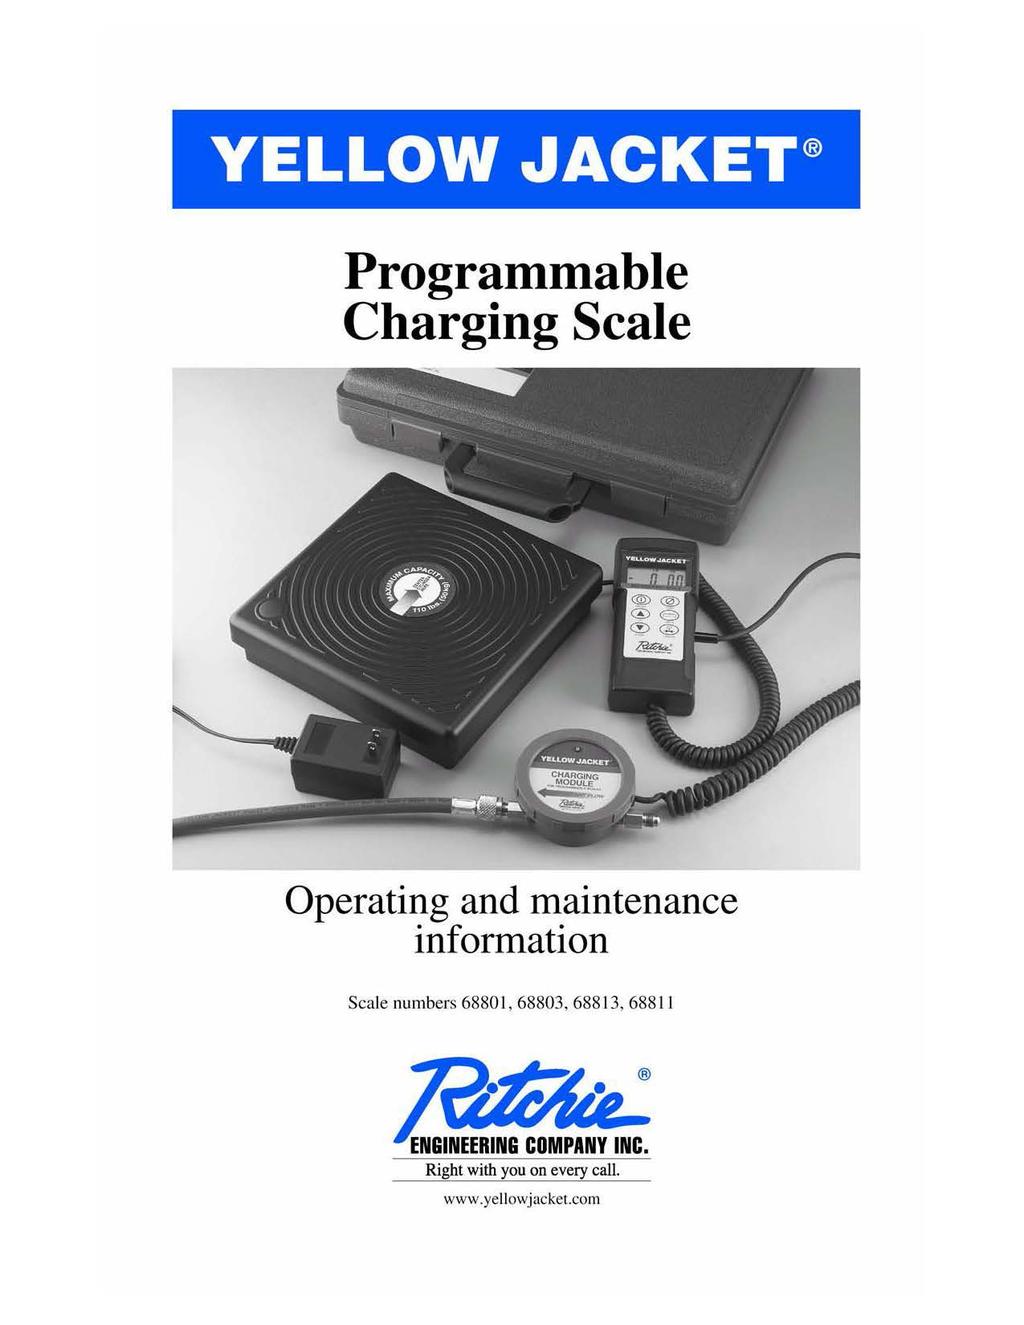 YELLOW JACKET Programmable Charging Scale Operating and maintenance information Scale numbers 68801, 68803, 688 13, 6881 J ljtt;/la ENGl= ING COMPANY INC.